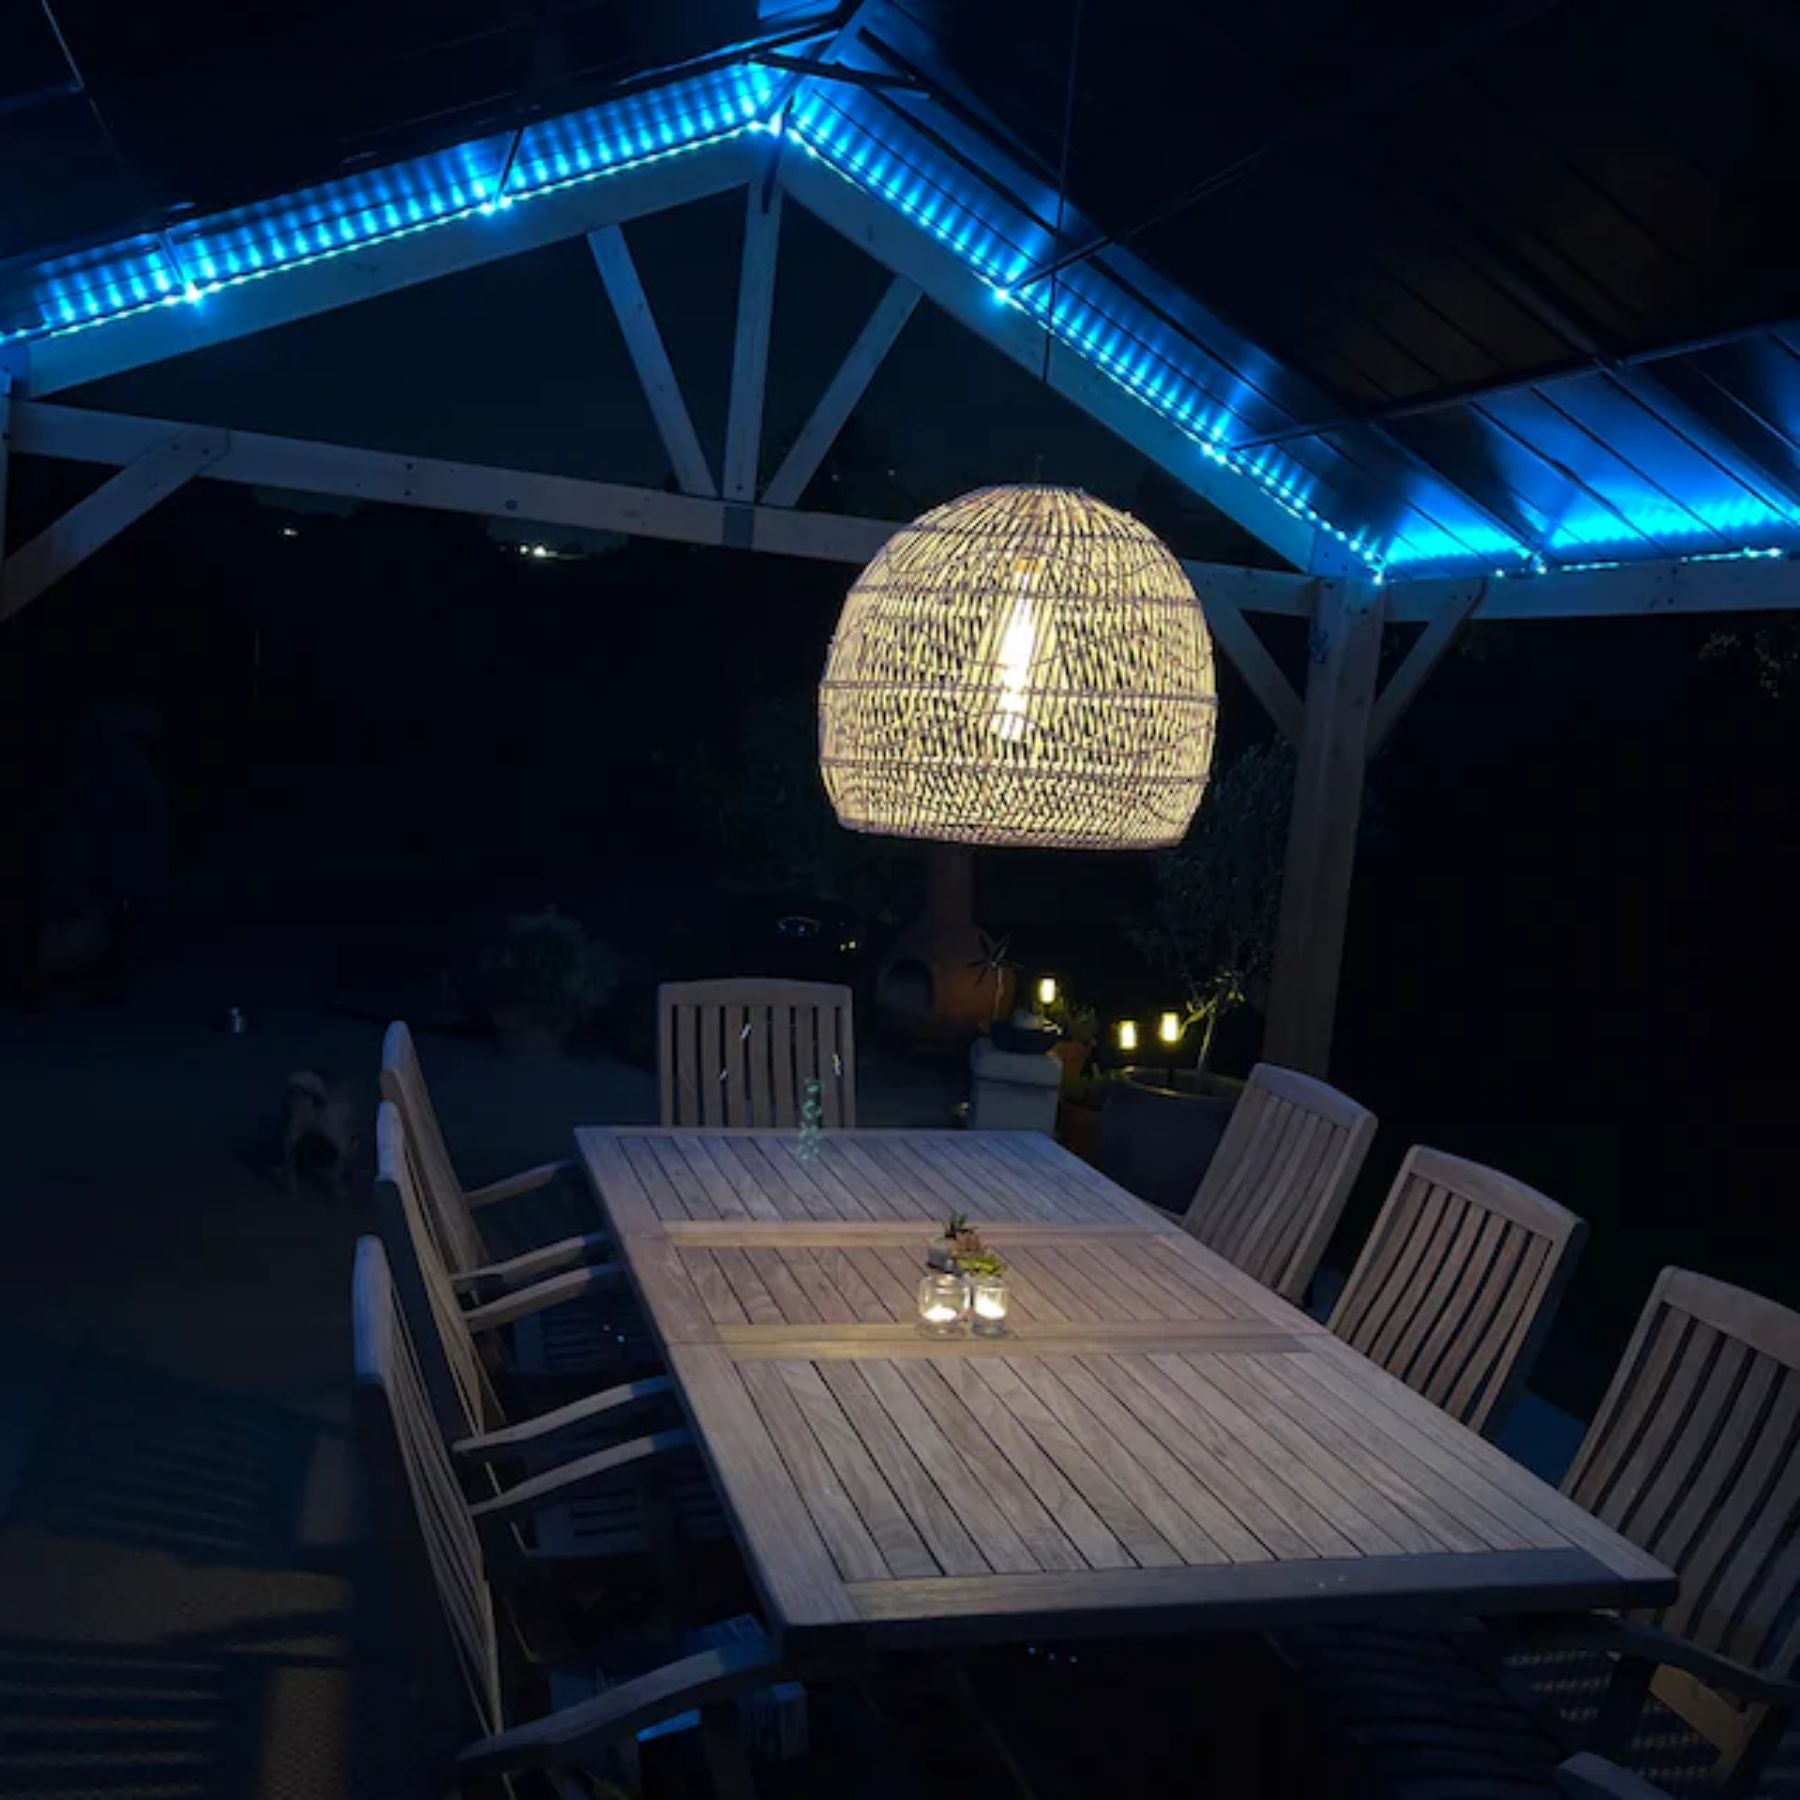 chris m: the rattan pendant light i bought from rowabi was the perfect solution add warmth and character to the space